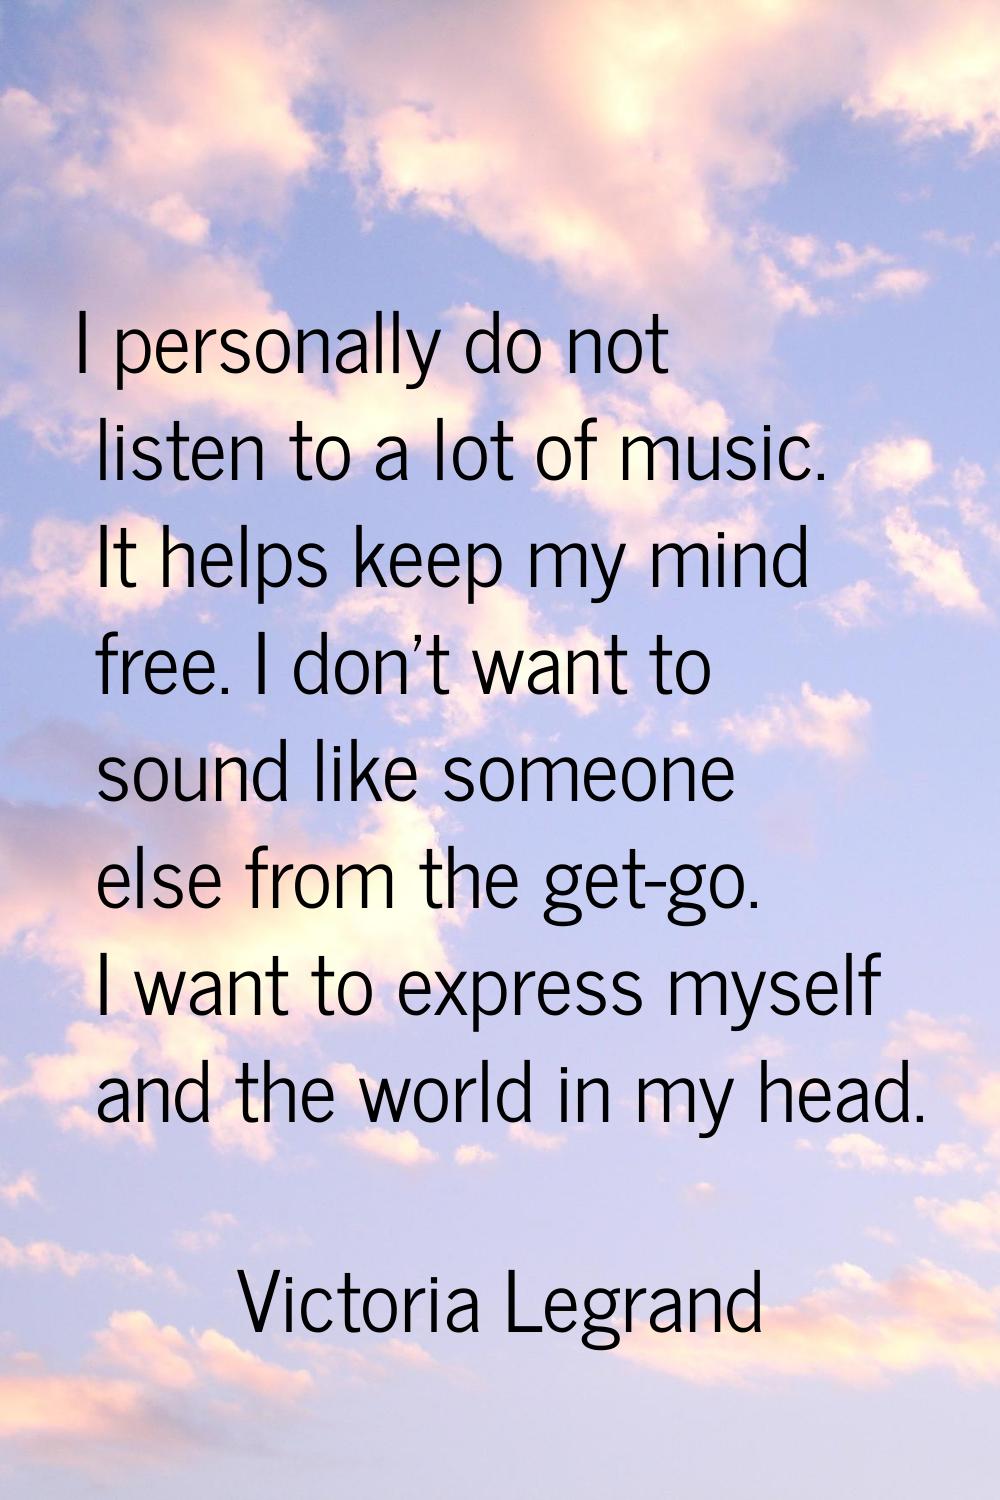 I personally do not listen to a lot of music. It helps keep my mind free. I don't want to sound lik